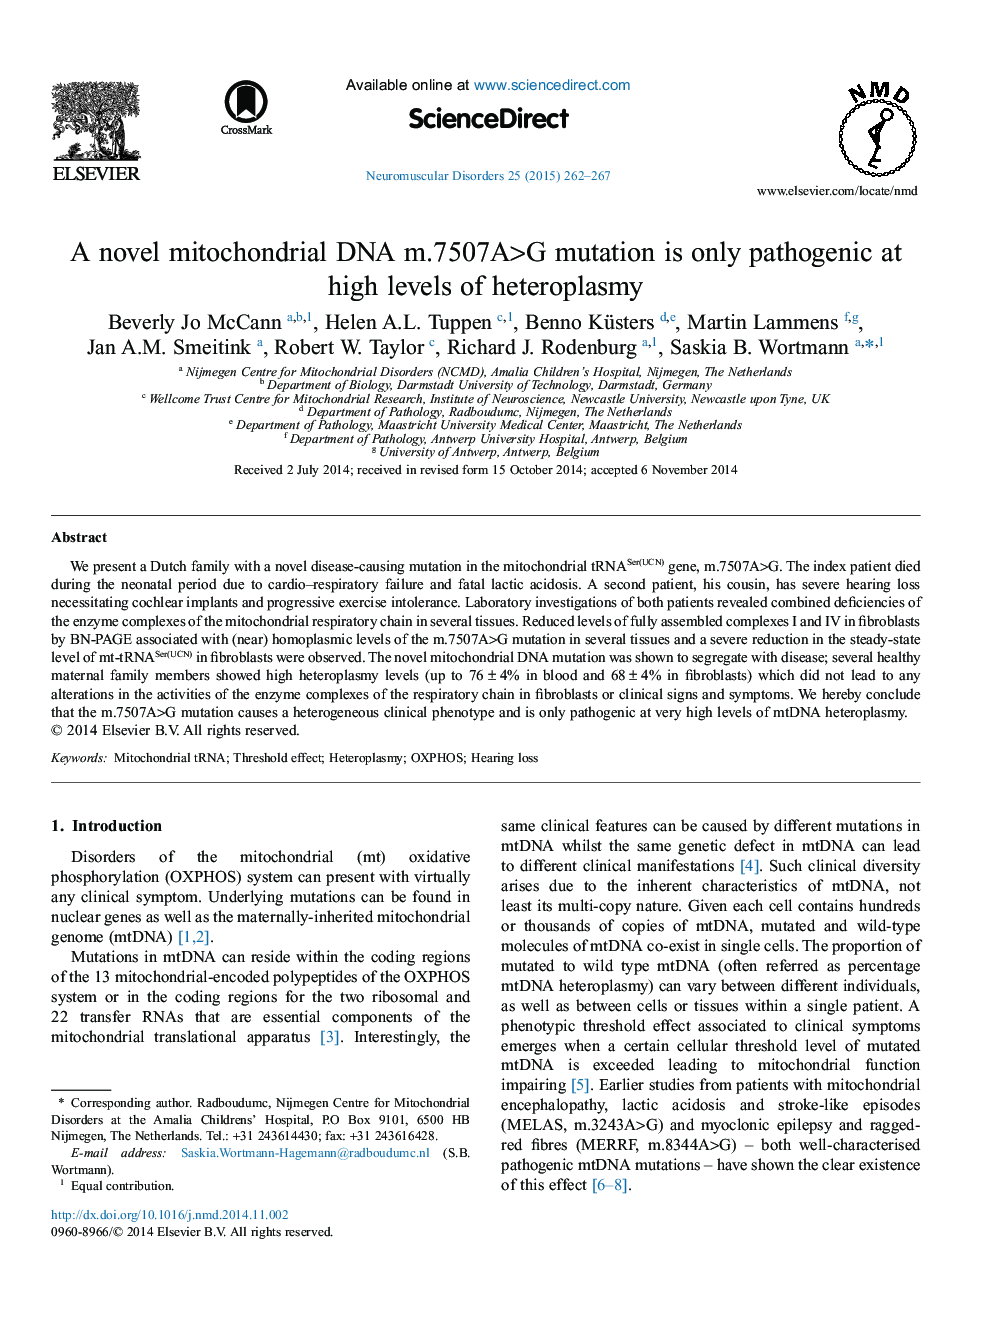 A novel mitochondrial DNA m.7507A>G mutation is only pathogenic at high levels of heteroplasmy